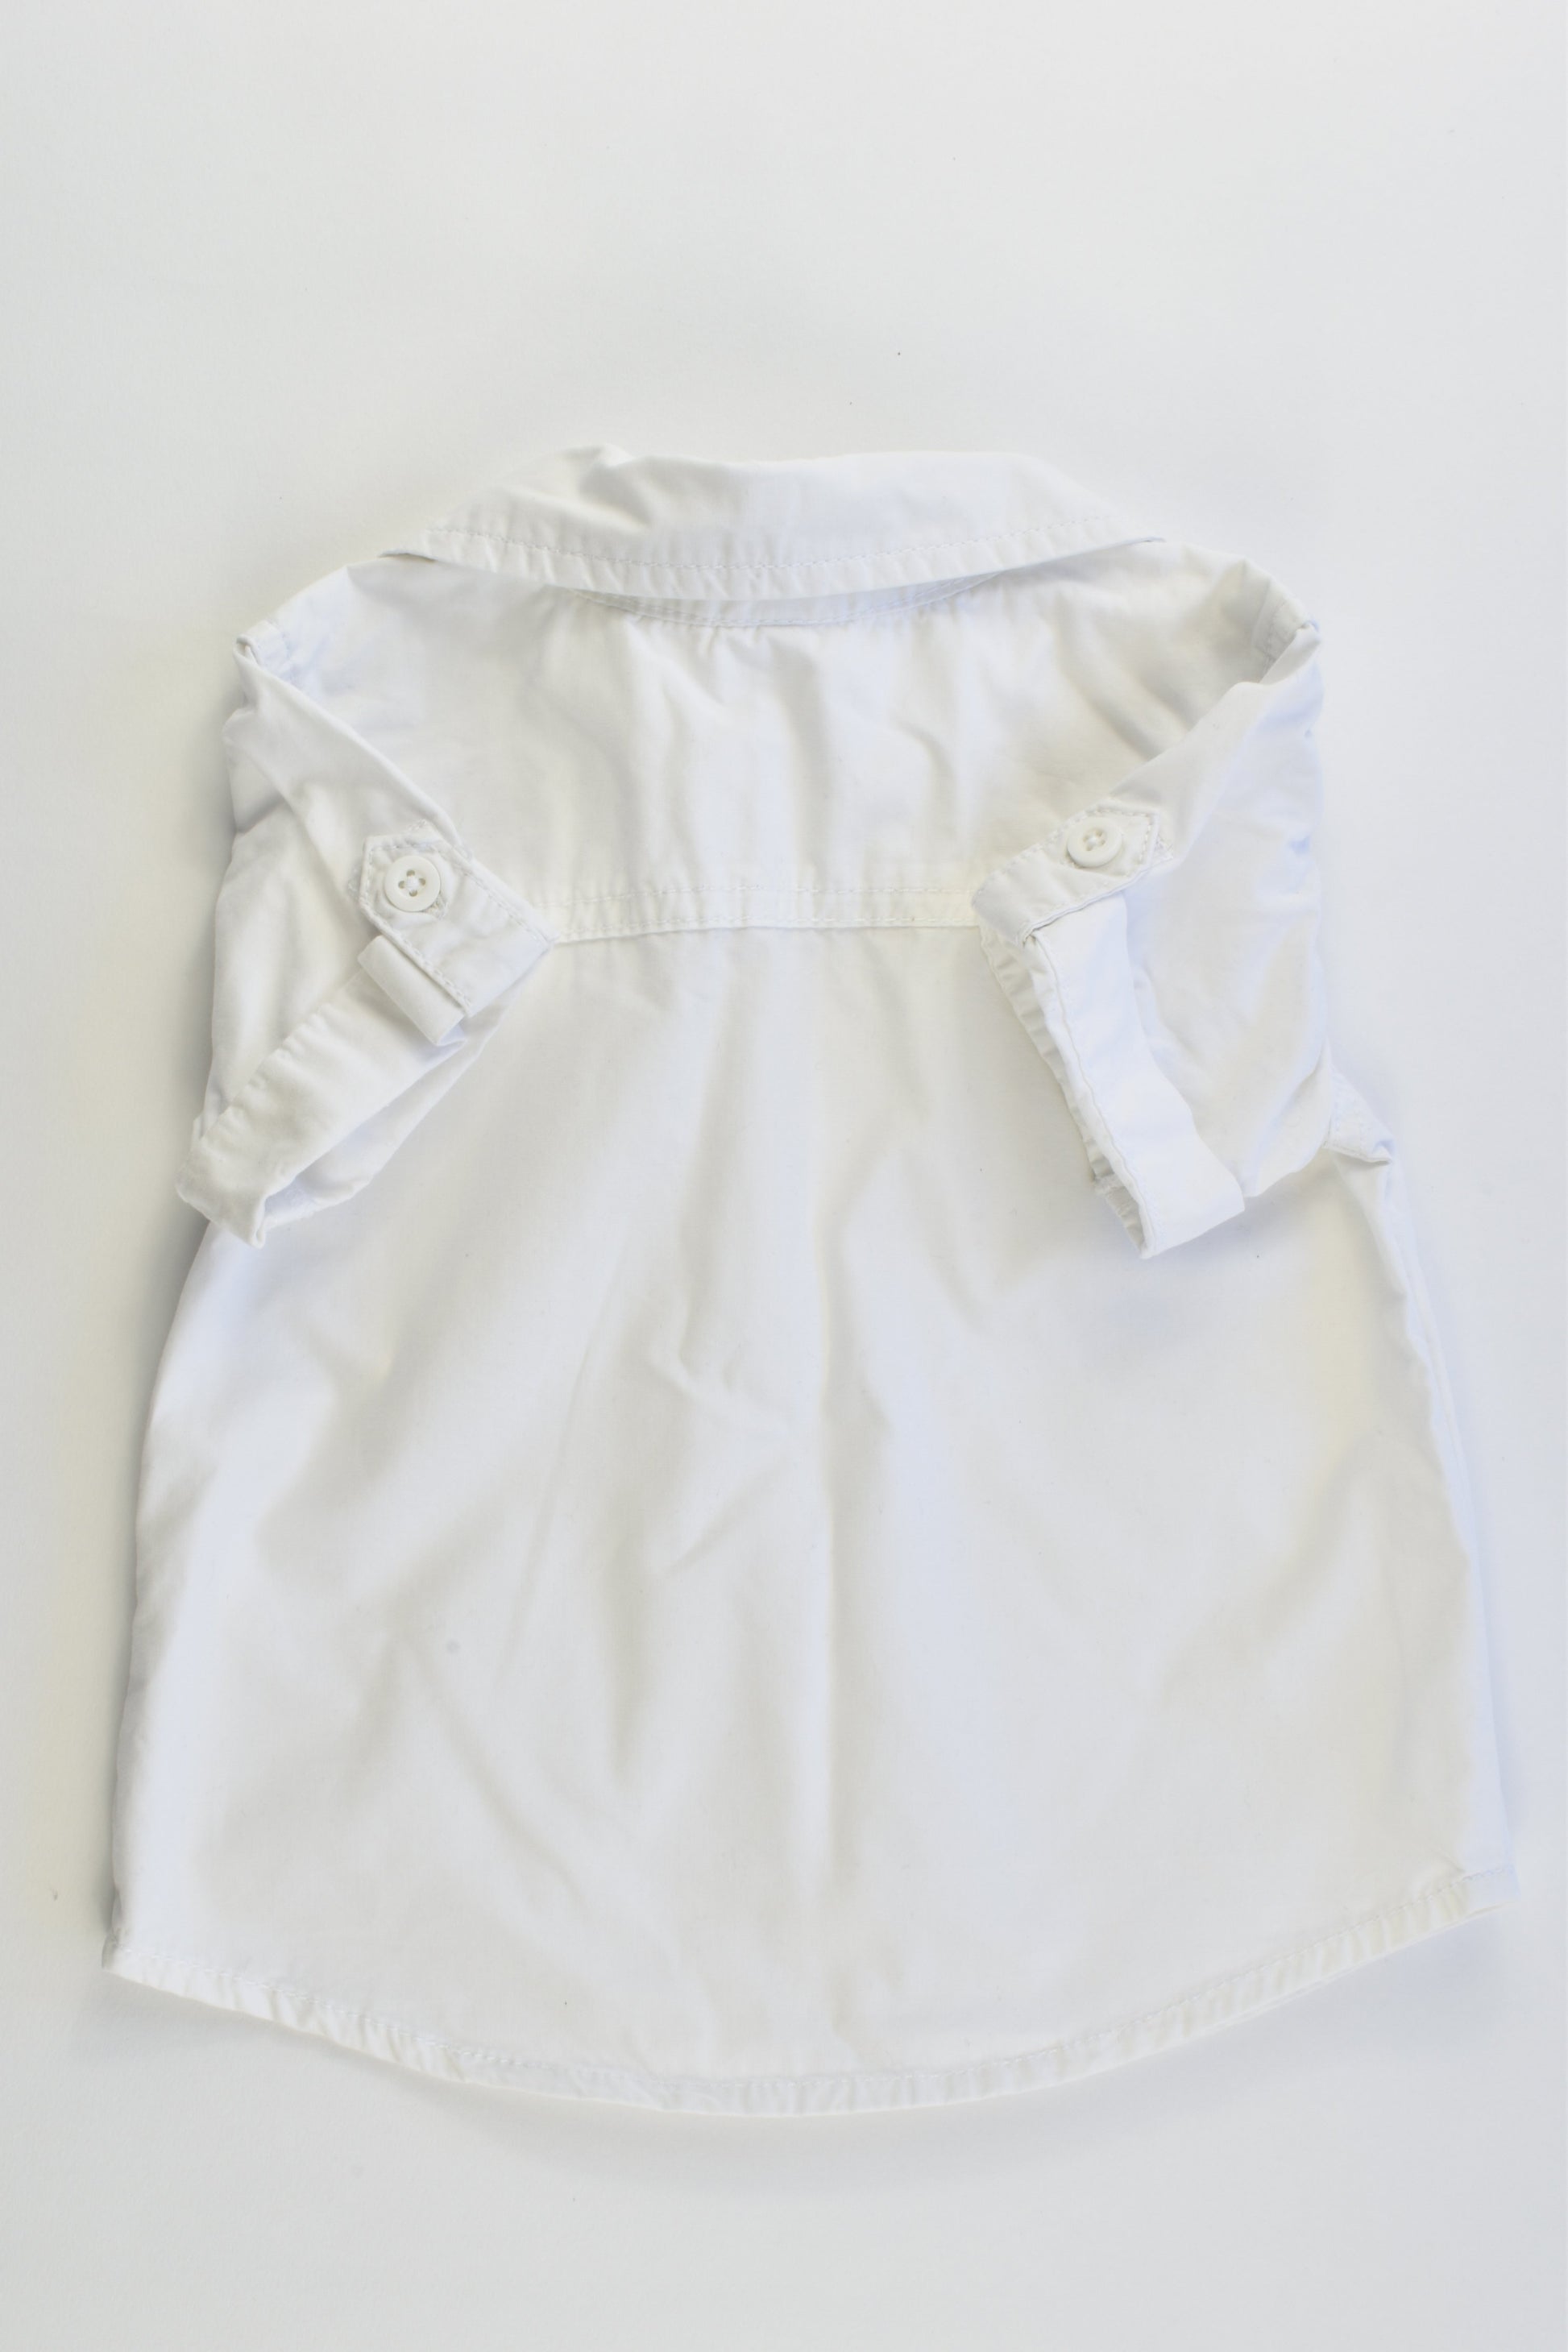 Tiny Little Wonders Size 0 (6-12 months) White Collared Shirt